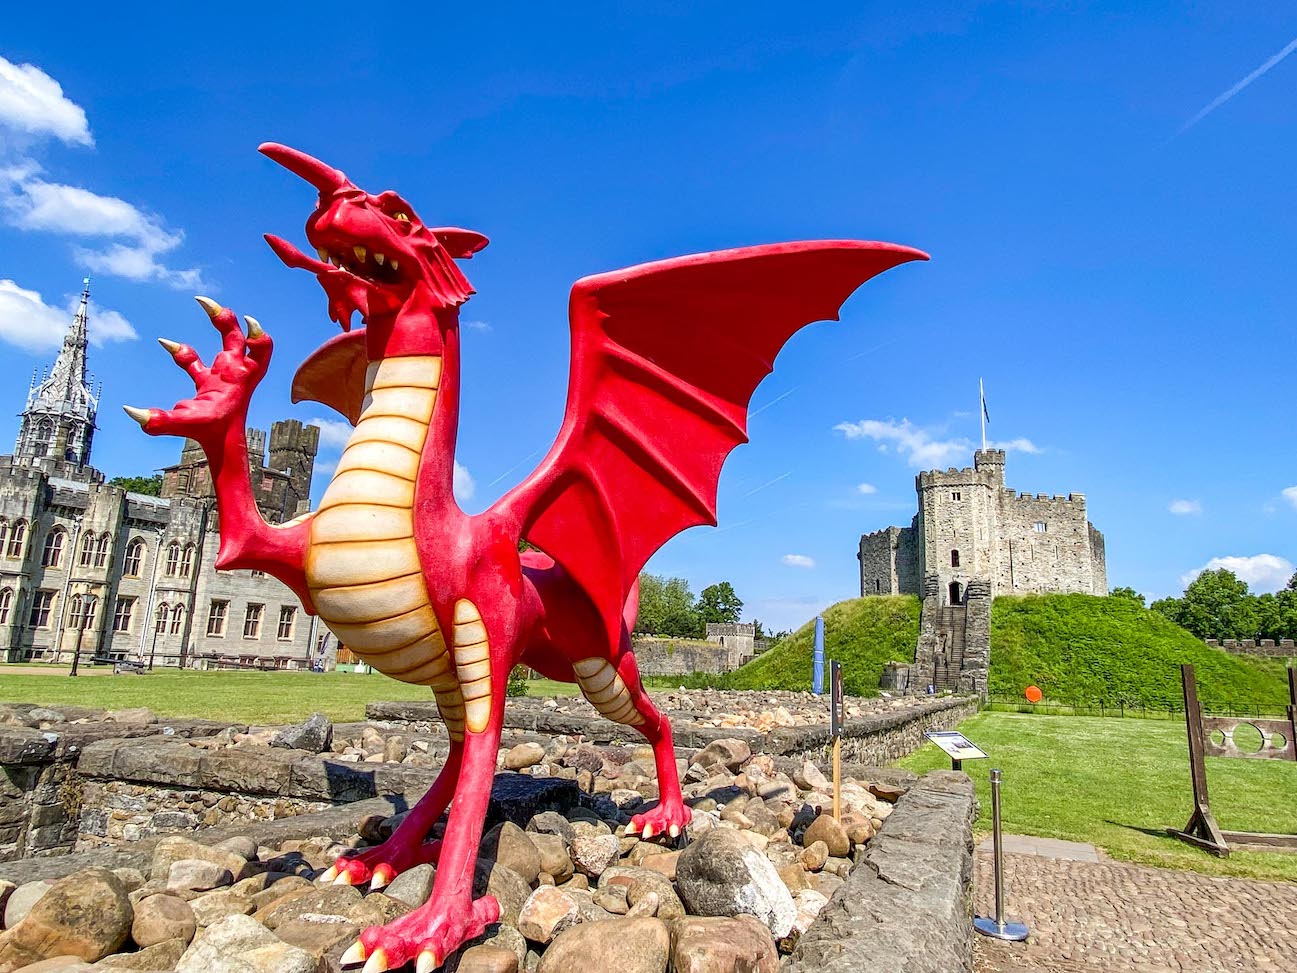 Places to visit in Wales, Cardiff Castle